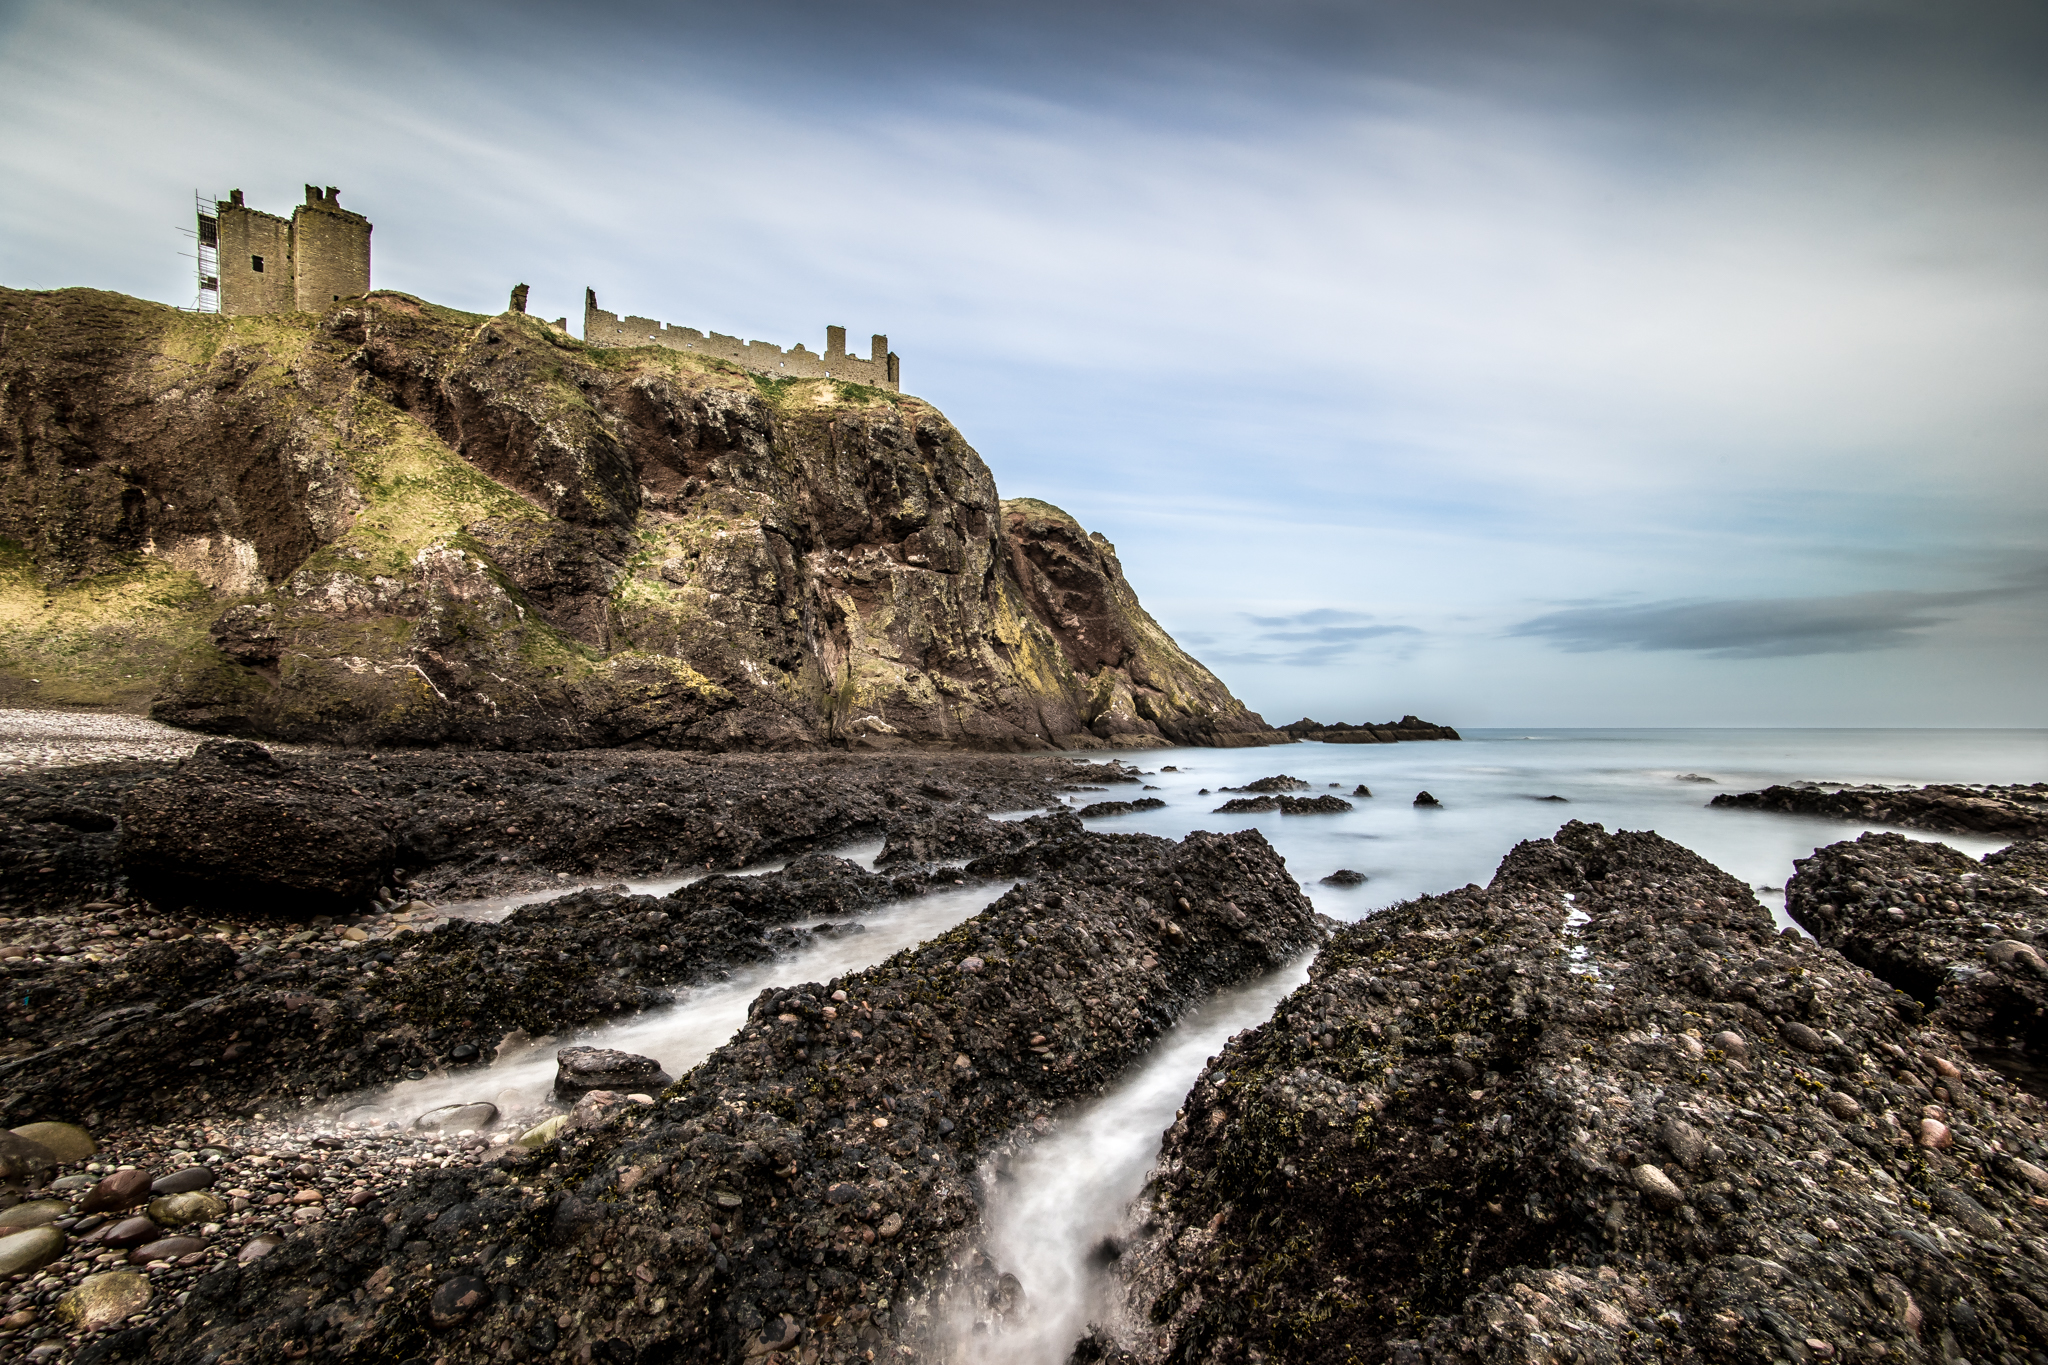 Dunnottar castle from the beach, Stonehaven, Scotland, United Kingdom